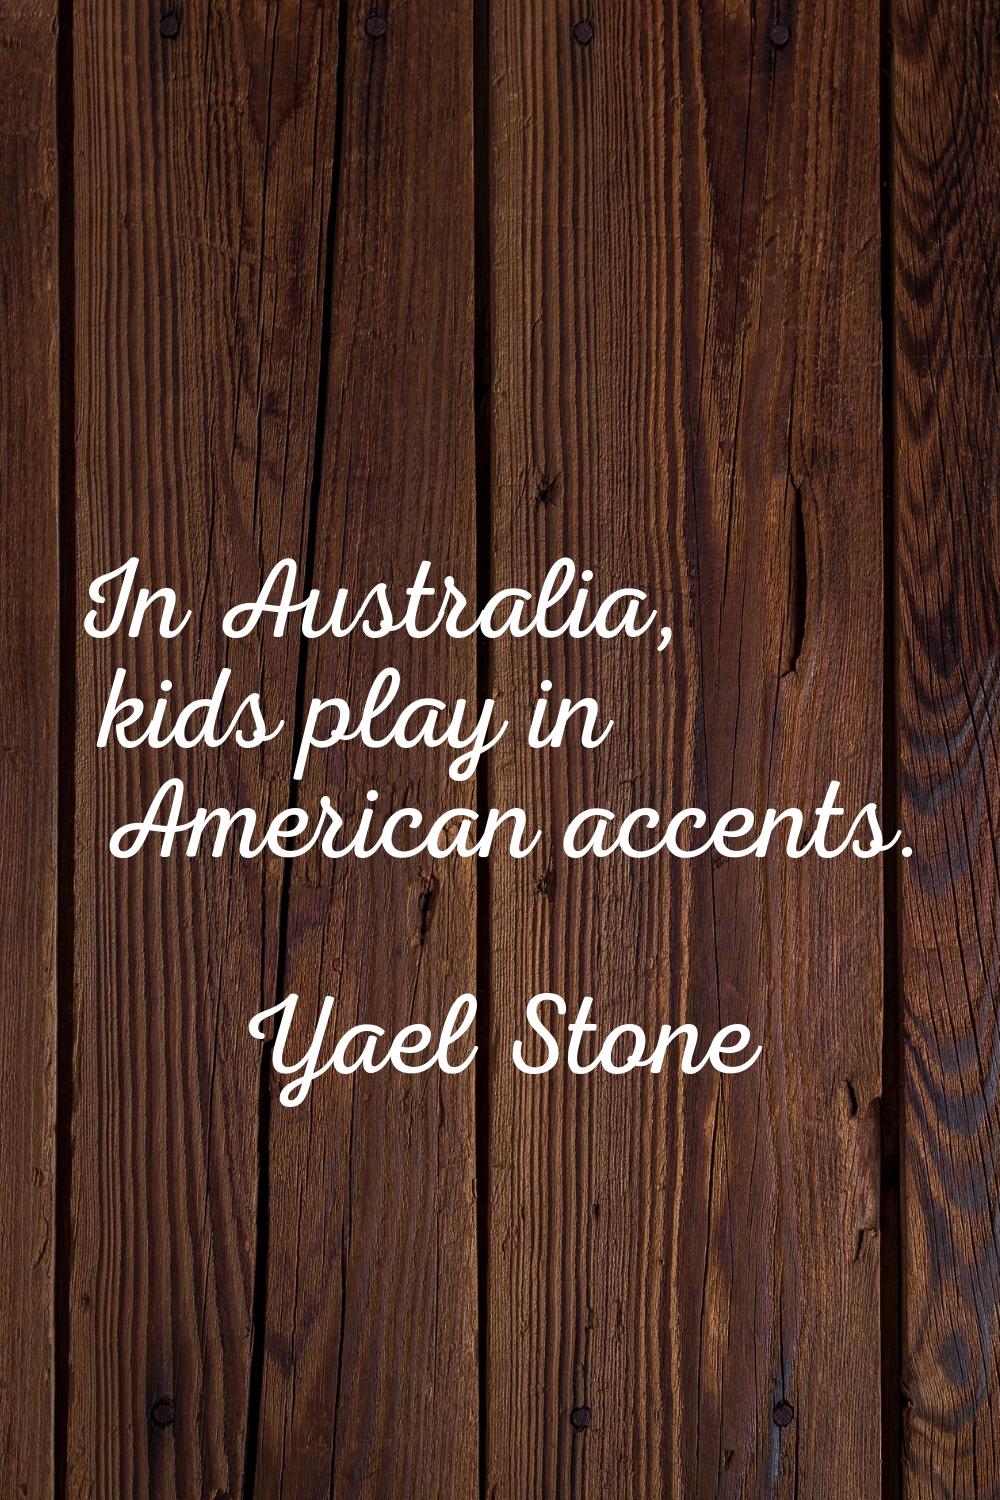 In Australia, kids play in American accents.